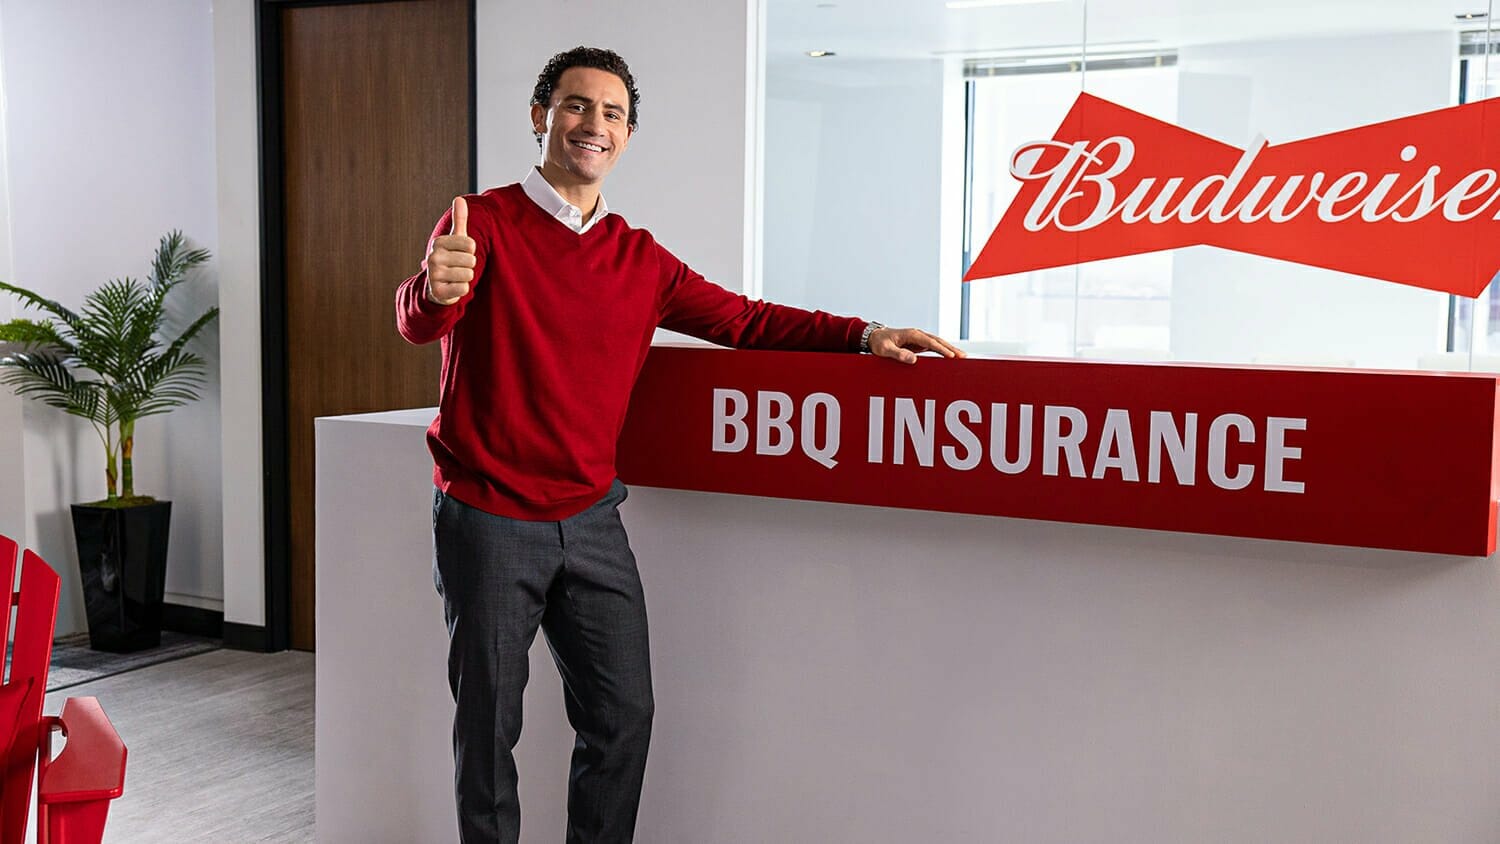 paul-bissonette-budweiser-bbq-insurance-Video-Production_Services